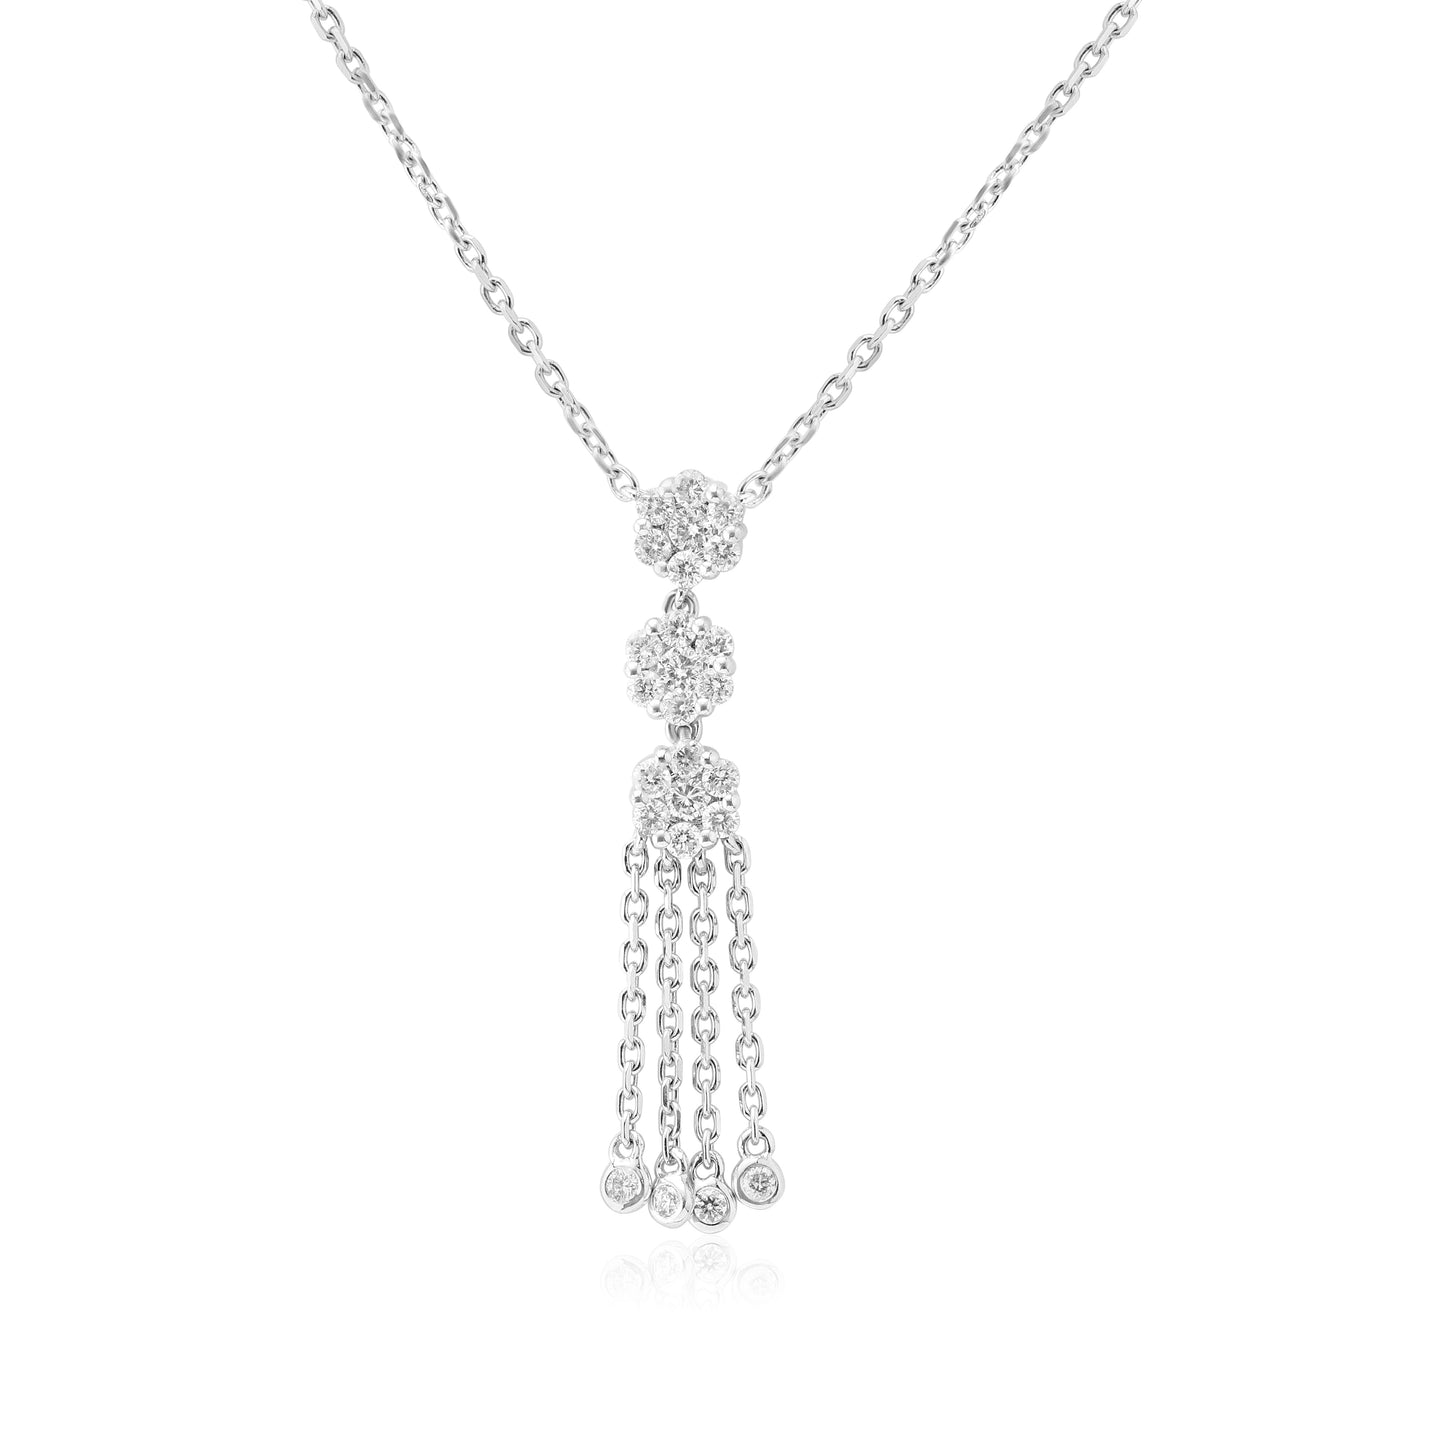 White Gold Necklaces White Gold Diamond 3 Cluster Pendant With 4 Tassels dansonjewelers Danson Jewelers 